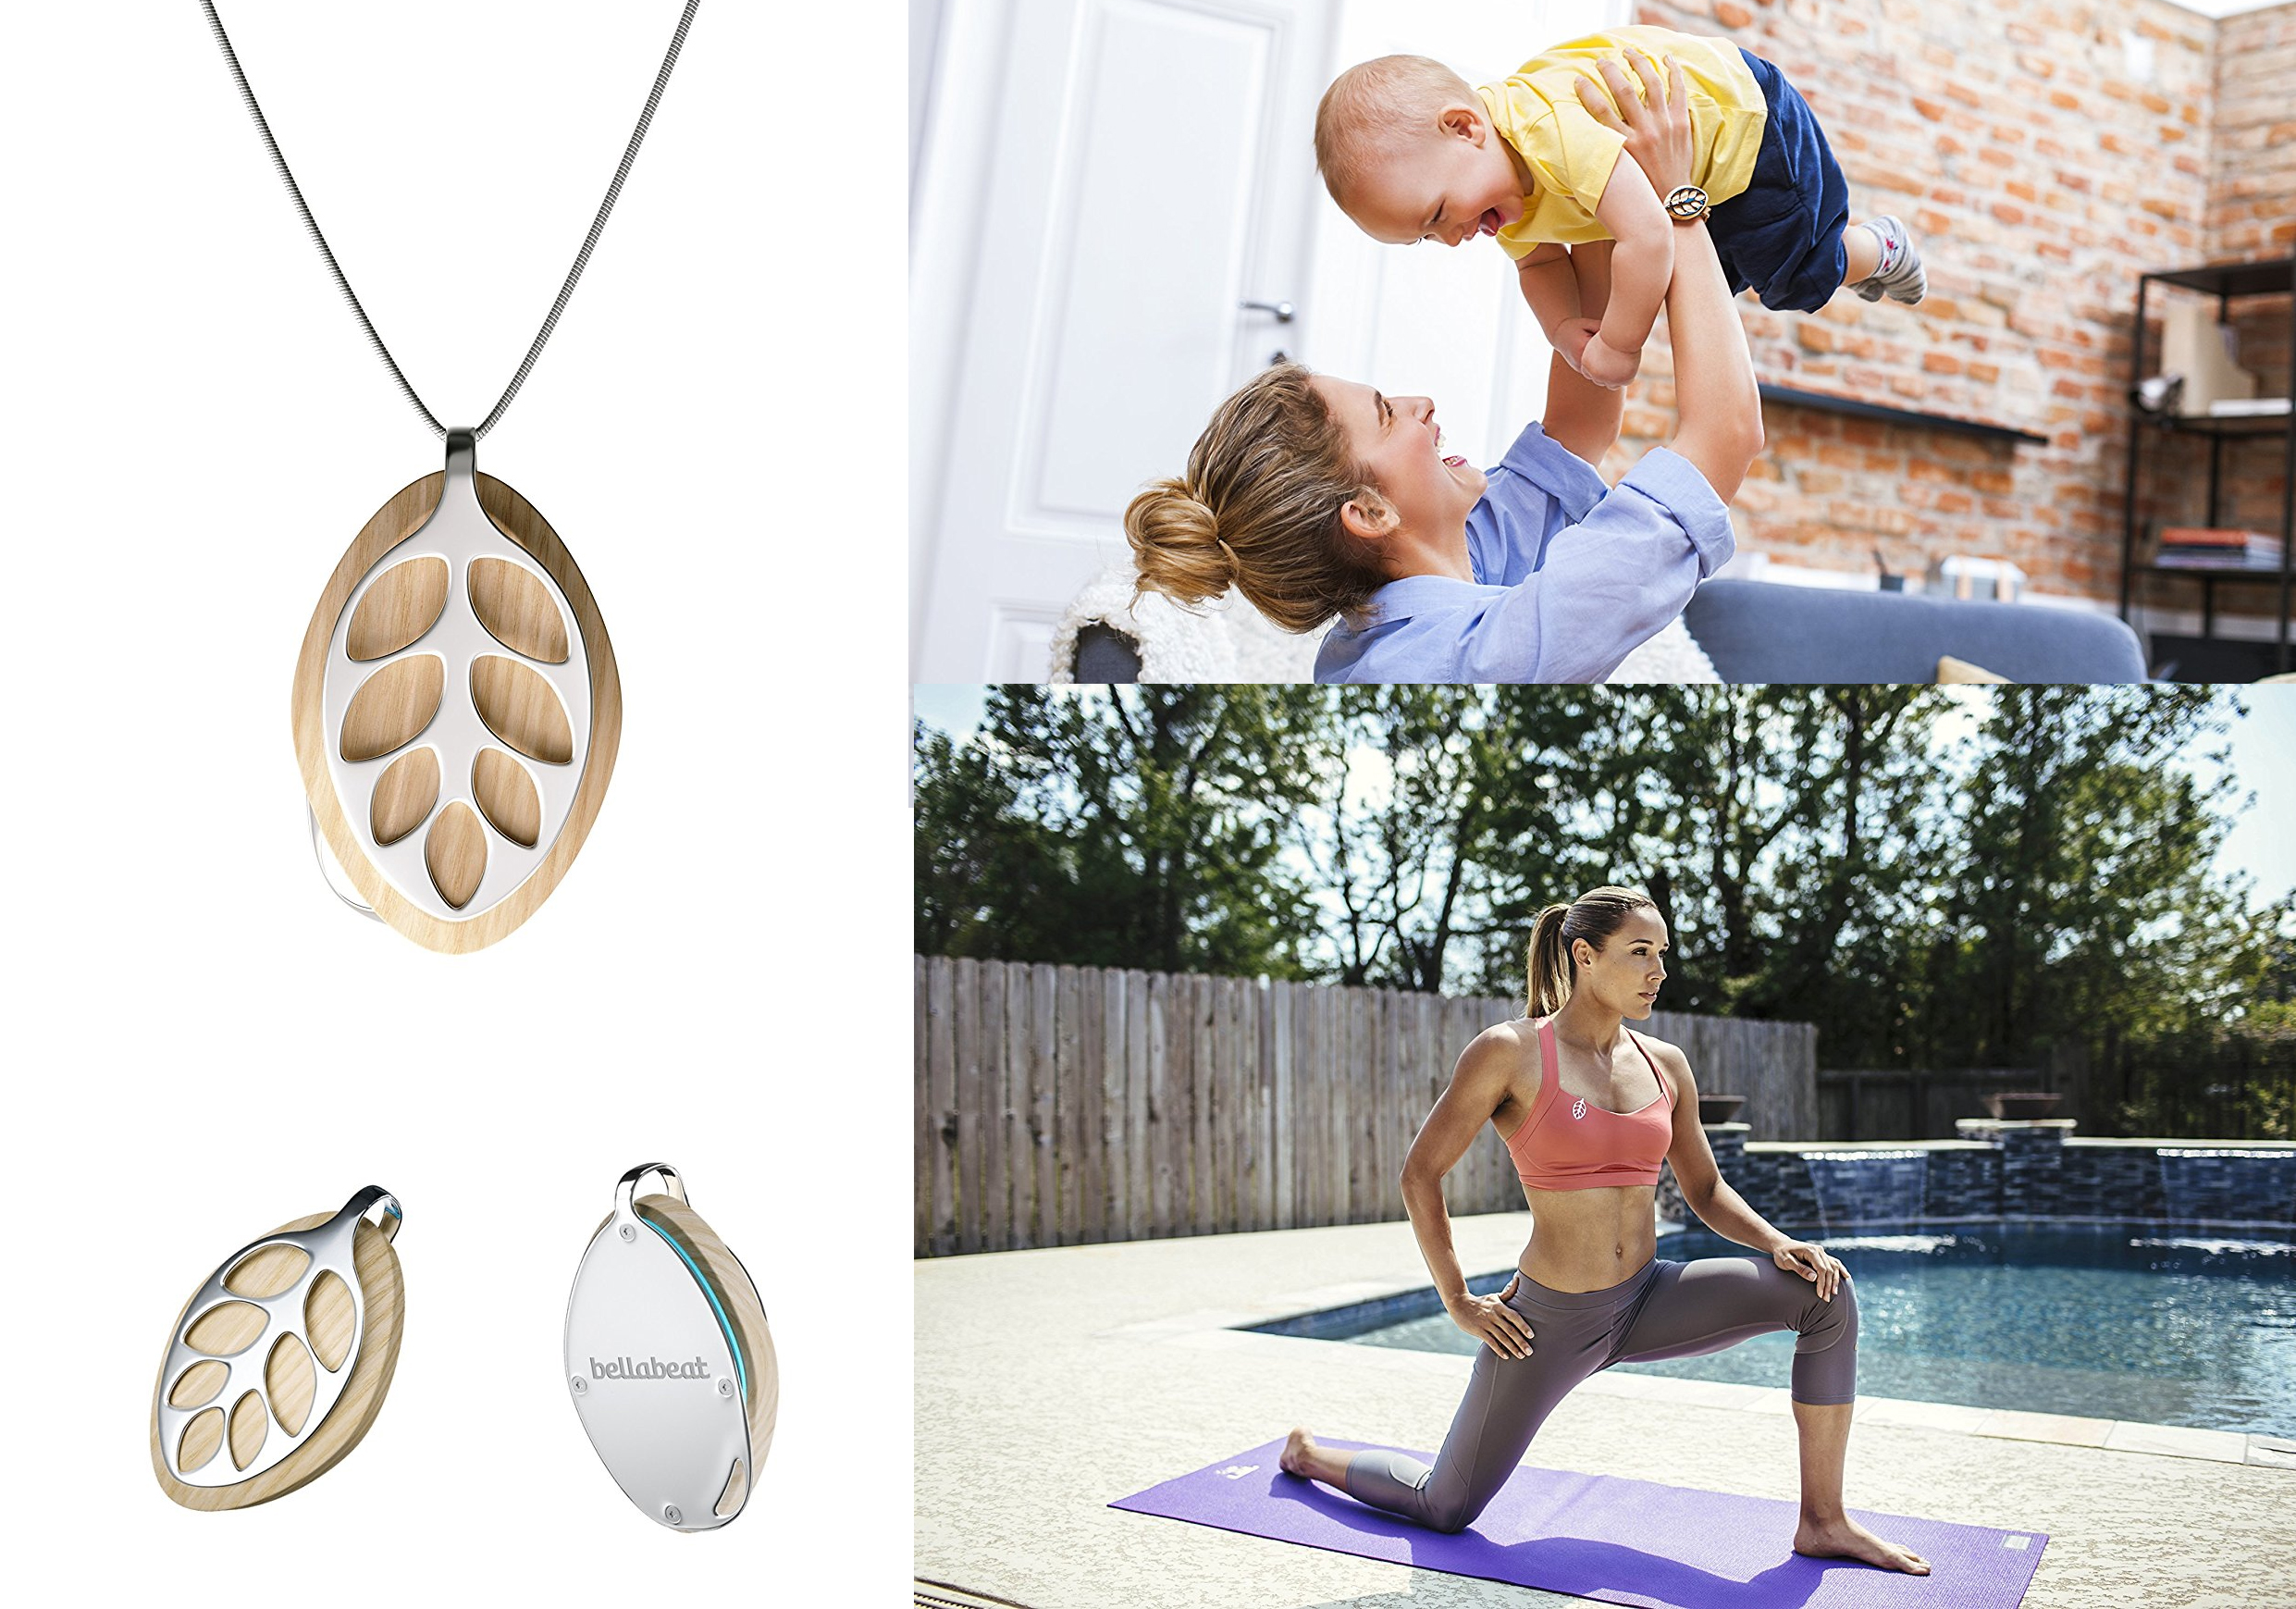 unique-gift-ideas-for-her-bellabeat-leaf-nature-health-tracker-smart-jewelry